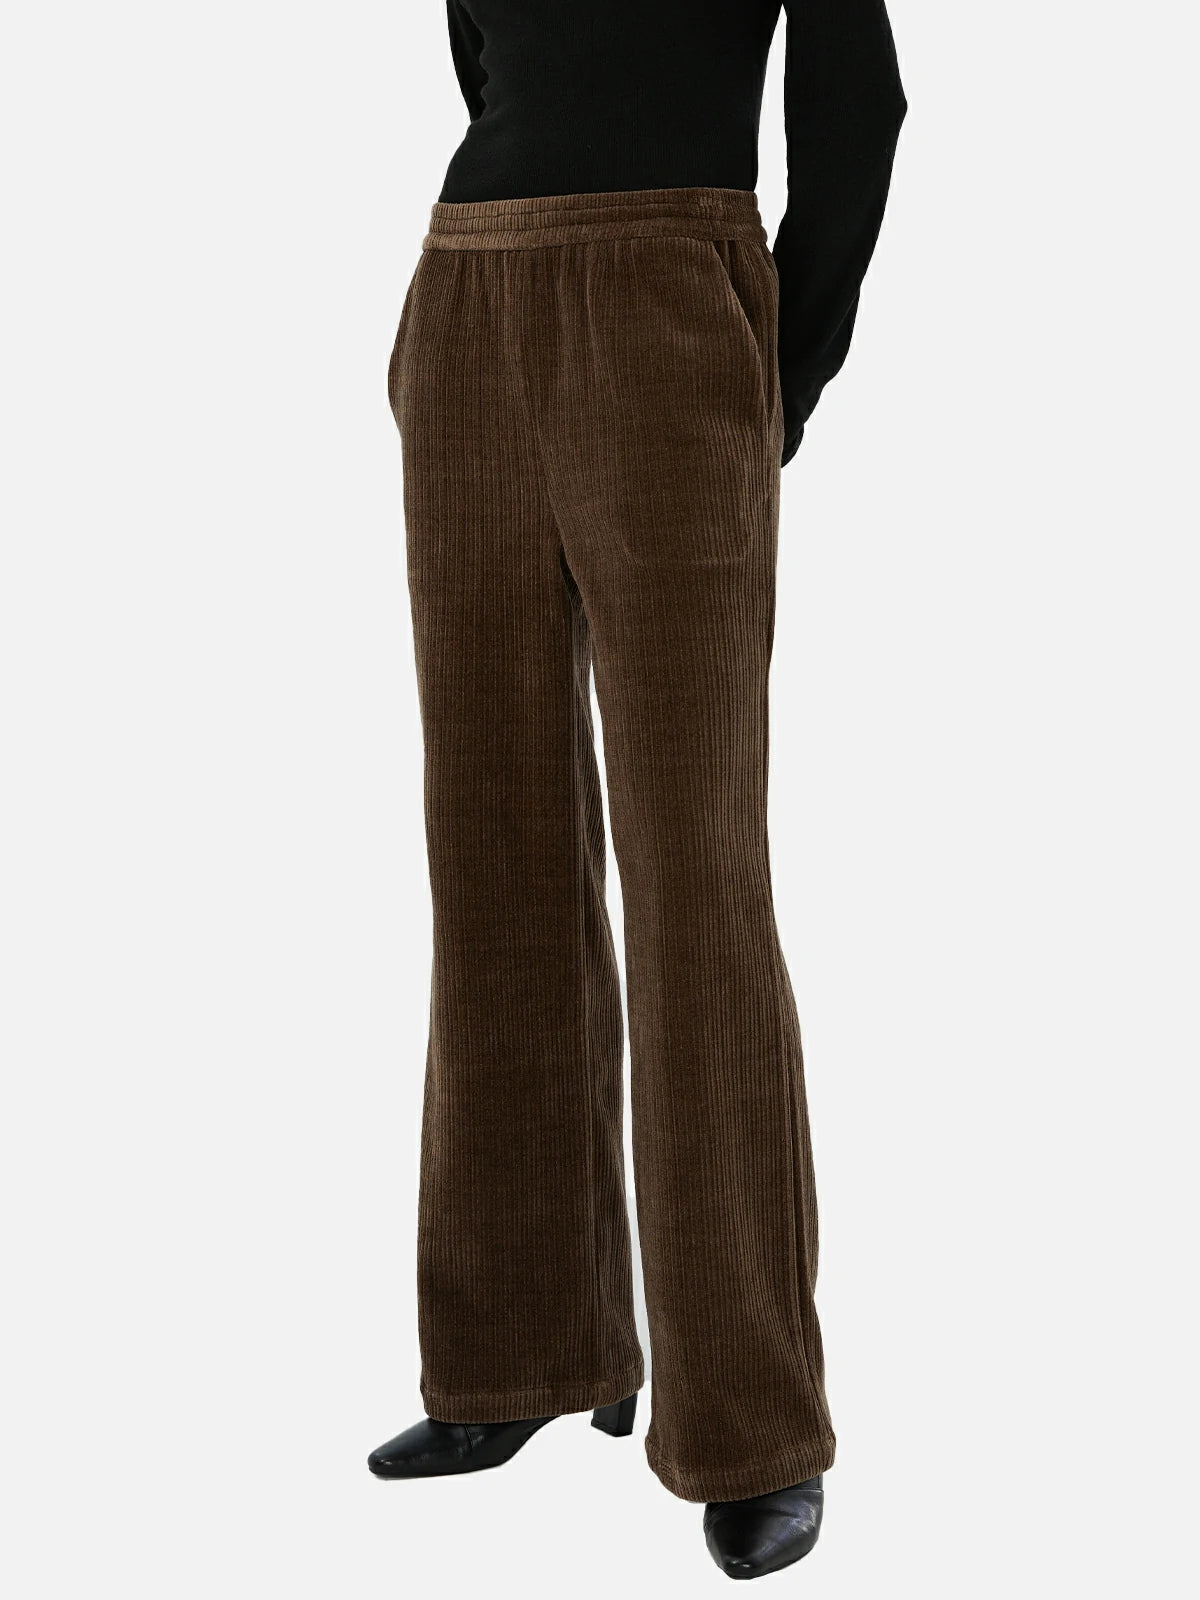 Styling tips for brown corduroy straight-leg pants with a classic and stylish appearance